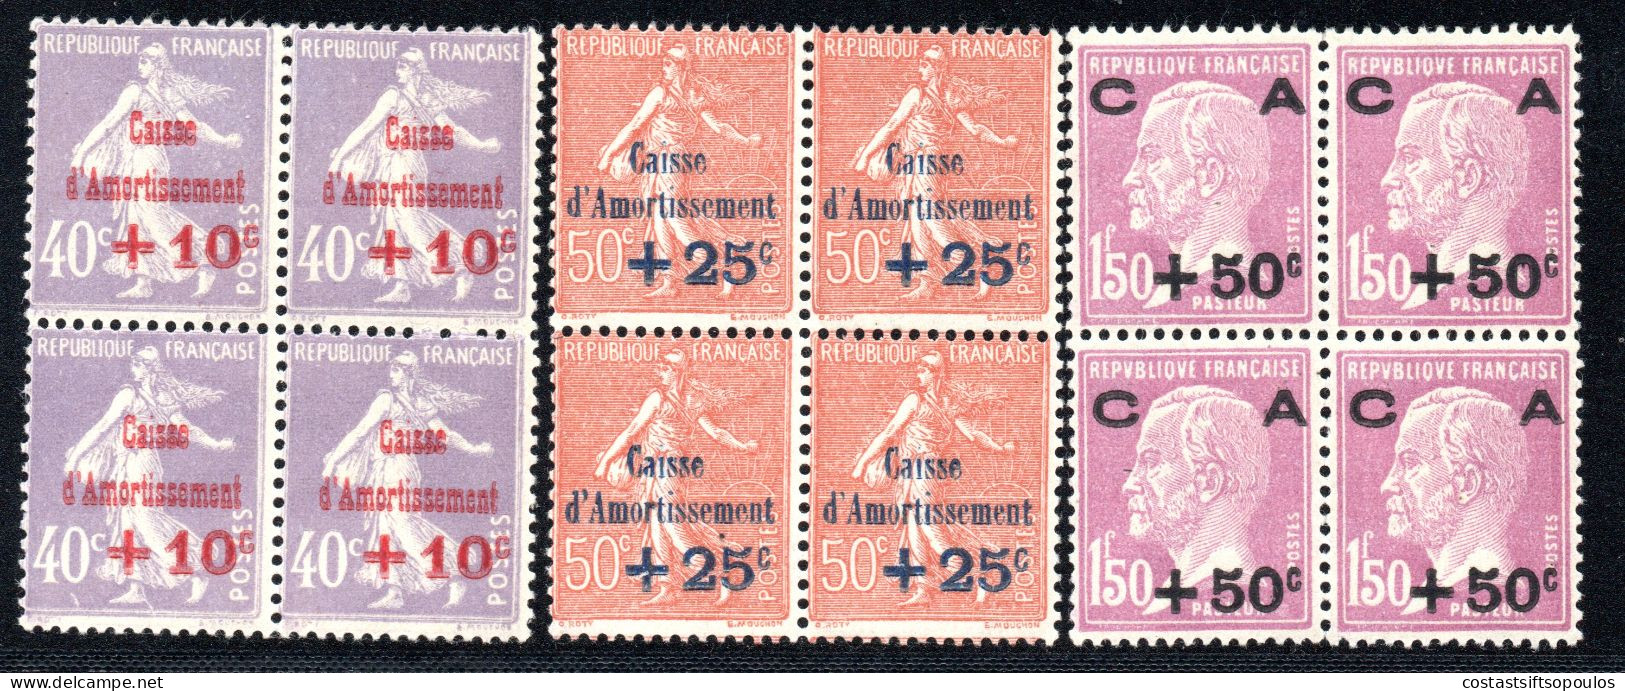 2683.FRANCE 1928 SINKING FUND Y.T.249-251,SC. B28-B30, BLOCKS OF 4, UPPER PAIR VERY LIGHT TRACES OF HINGE,LOWER MNH - 1927-31 Caisse D'Amortissement